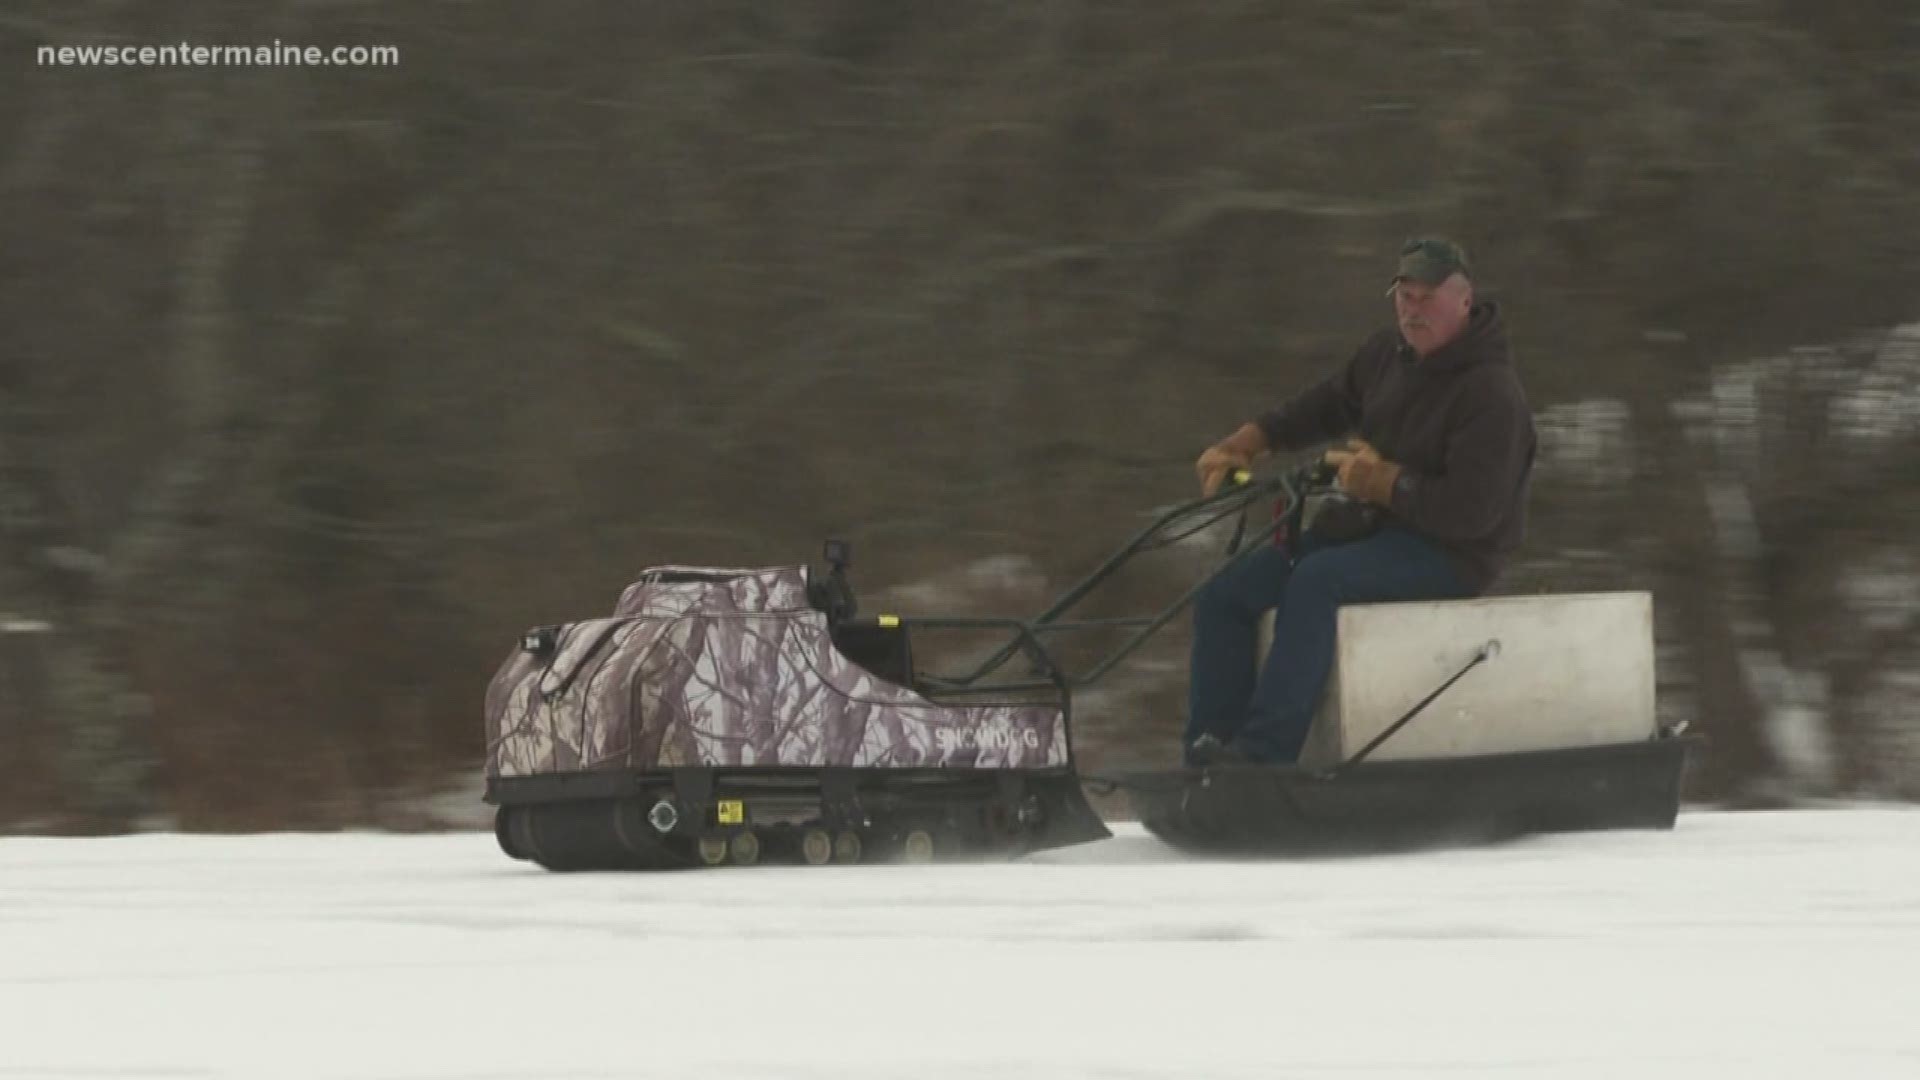 Snowdogs are an economical and easy-to-use machine for Mainers who don't want to buy a snowmobile.